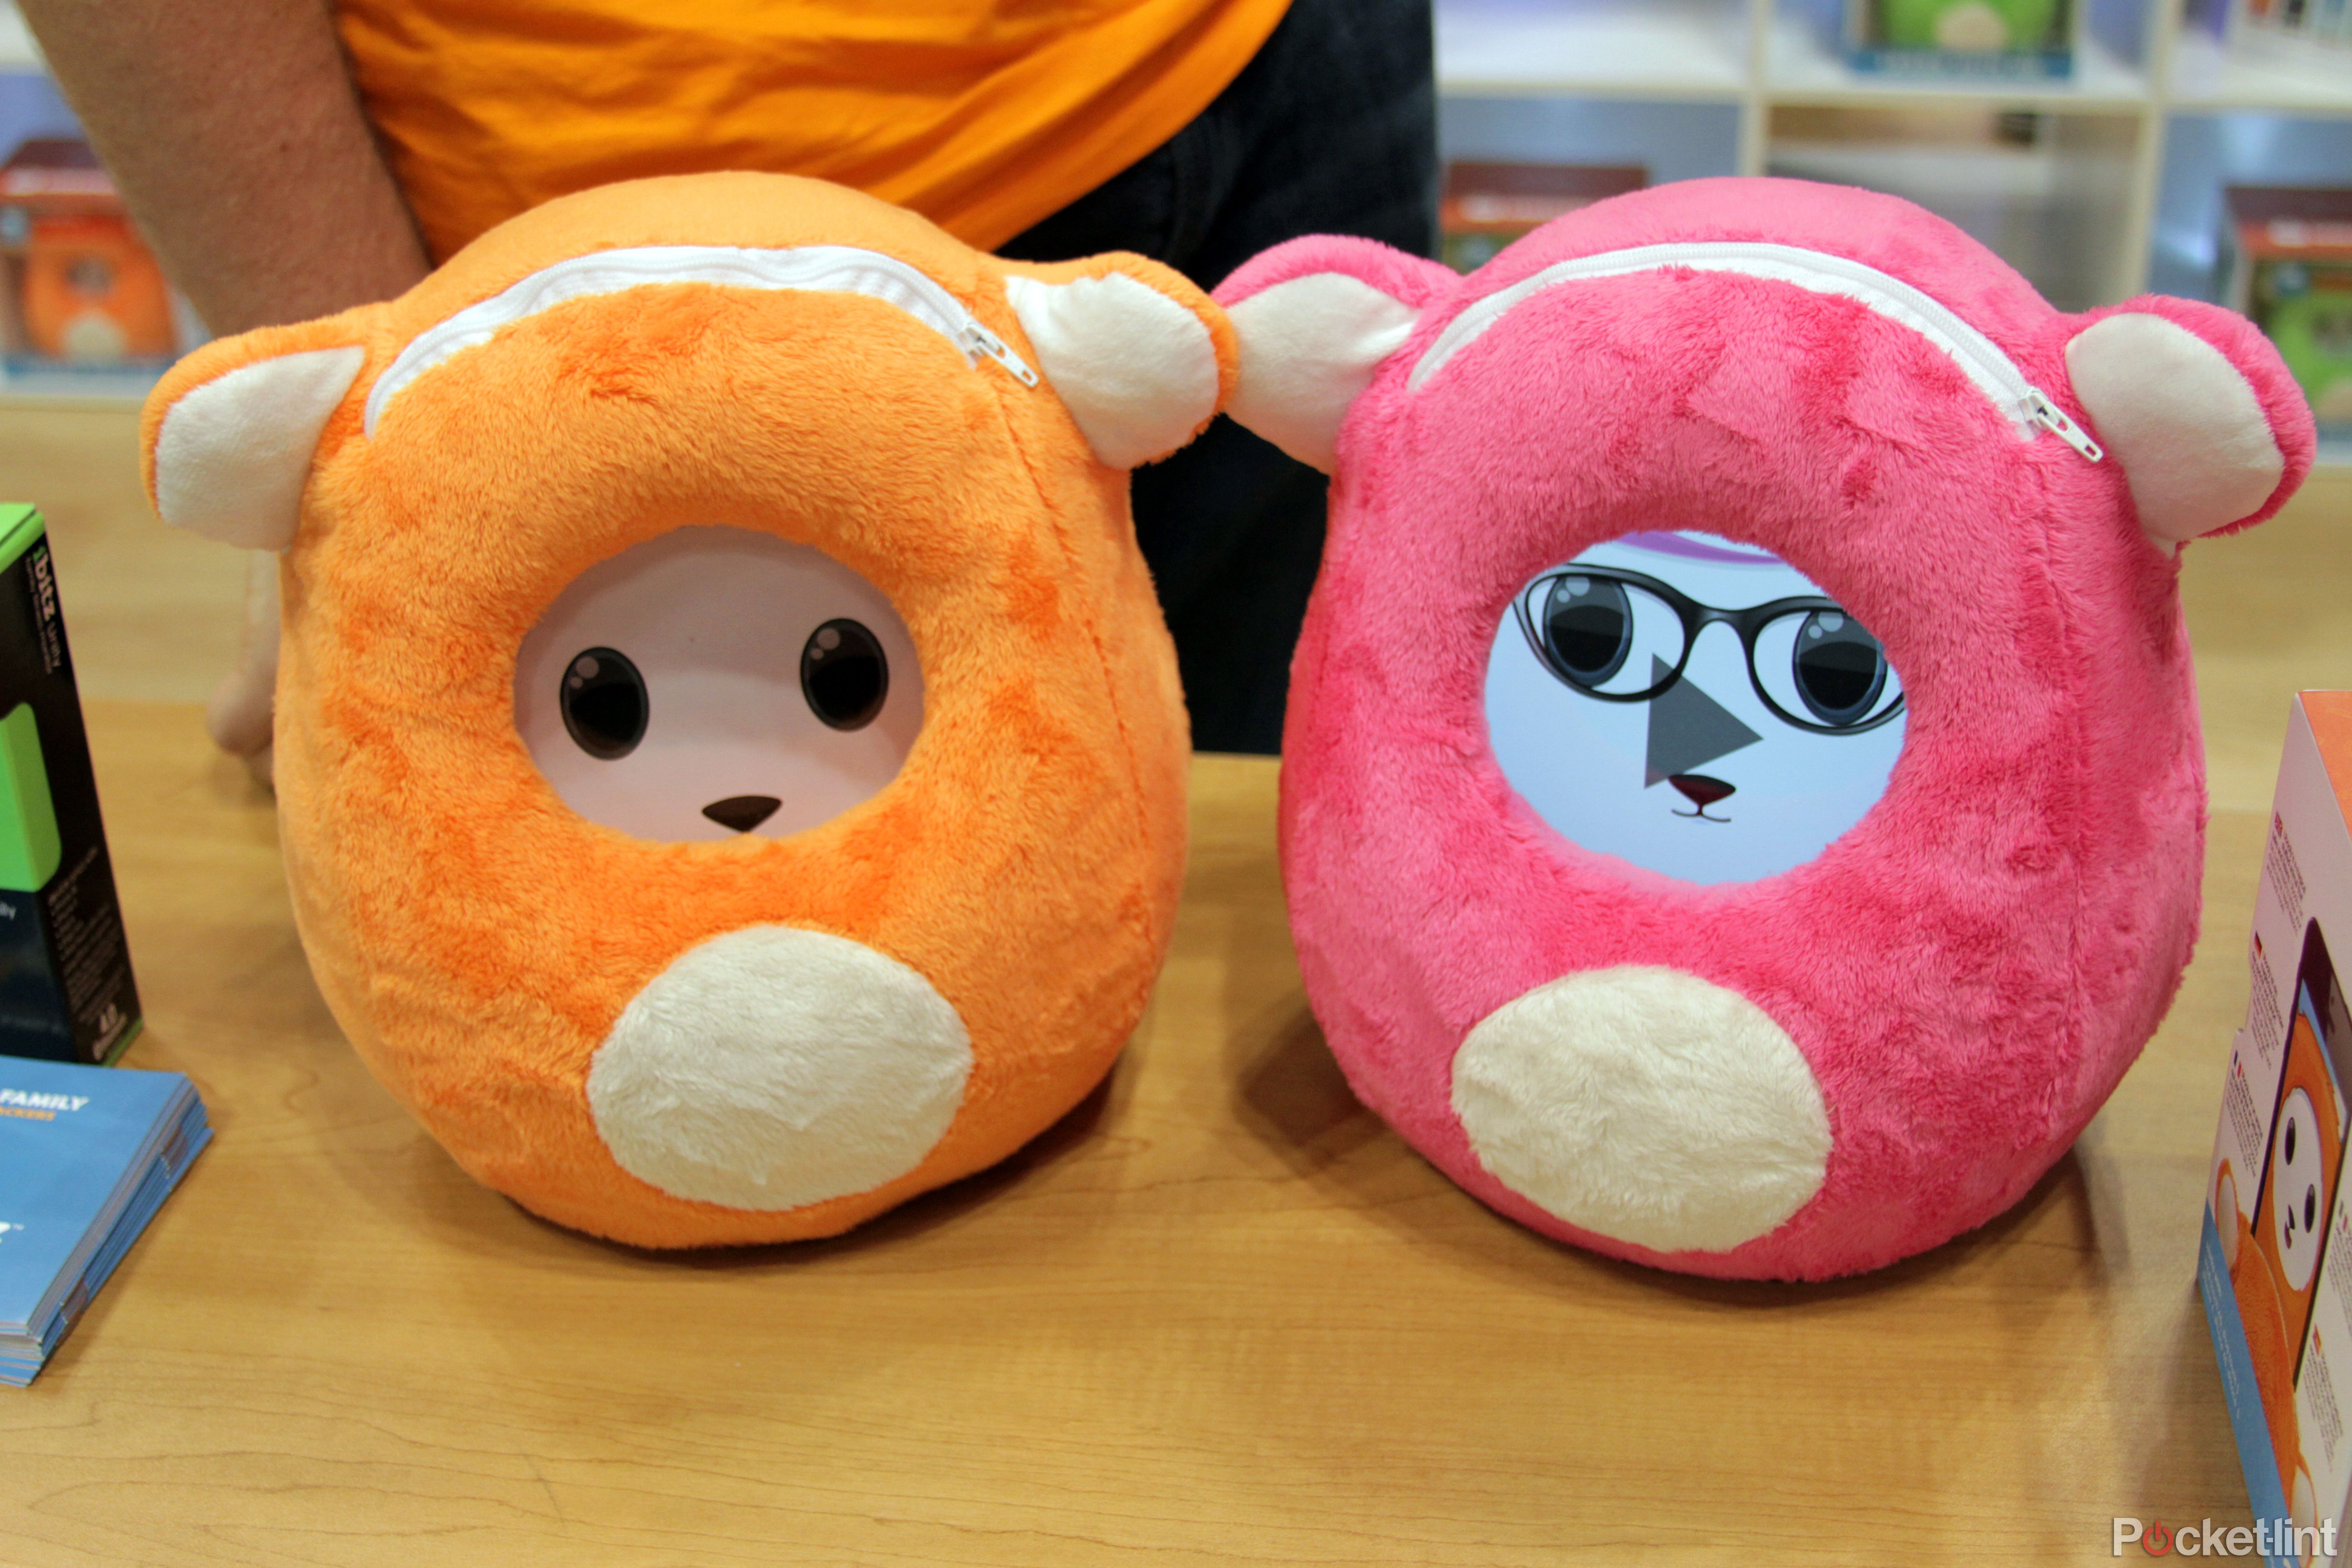 hands on ubooly plush toy and interactive app for mobile devices review image 4